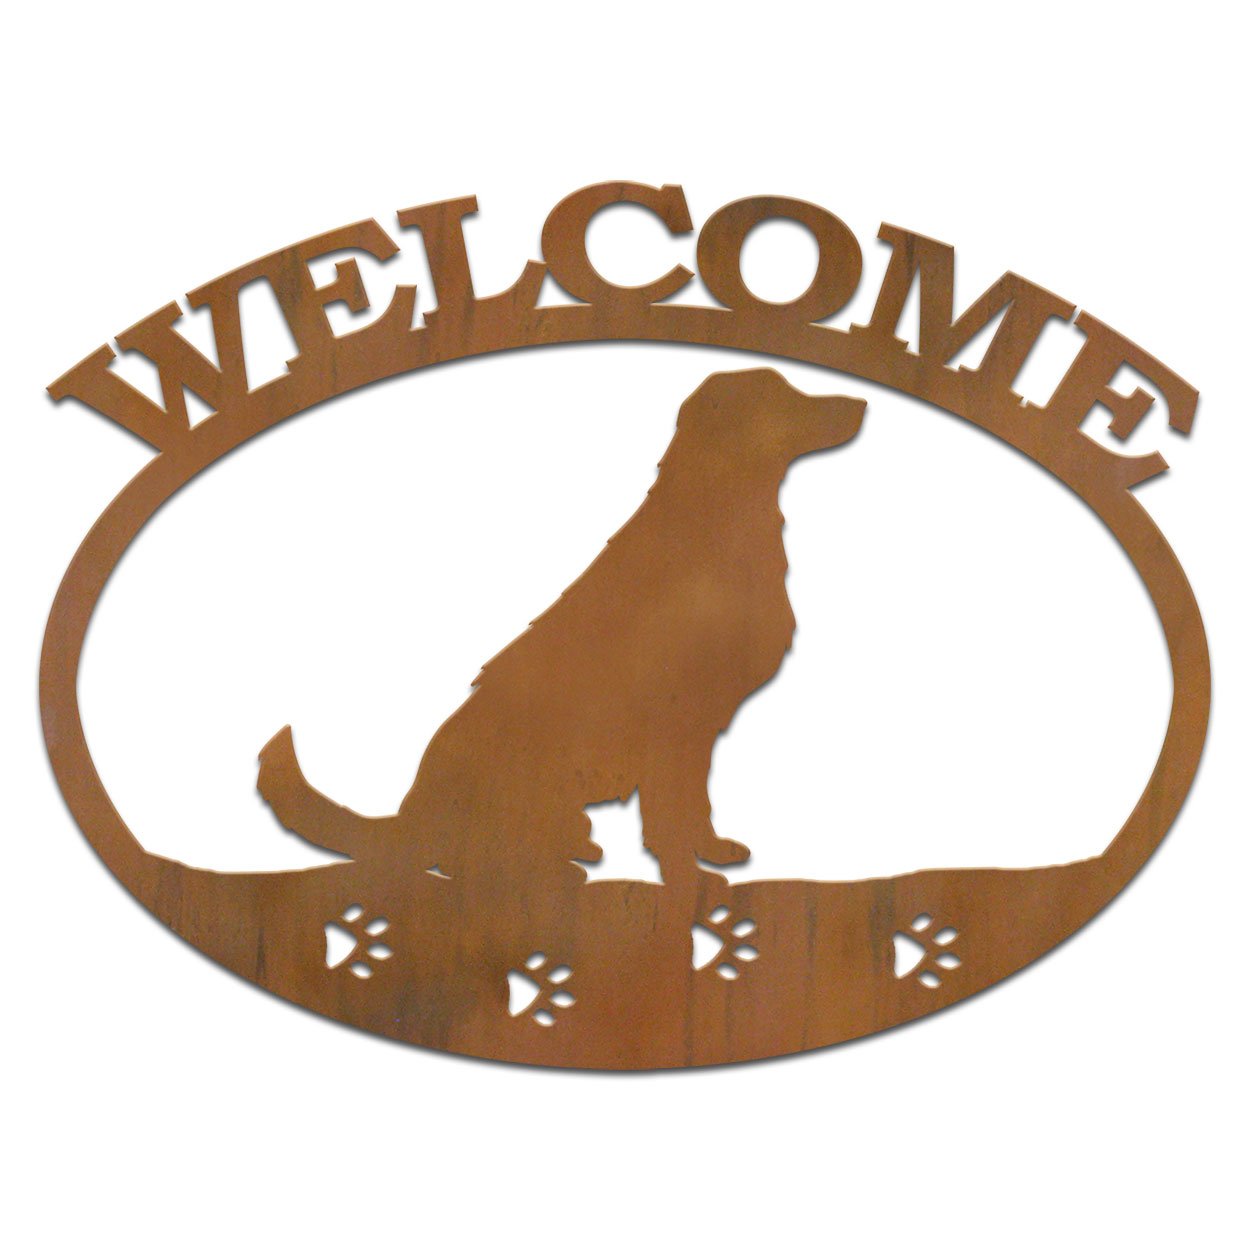 601210 - Golden Retriever Dog Breed Metal Welcome Sign